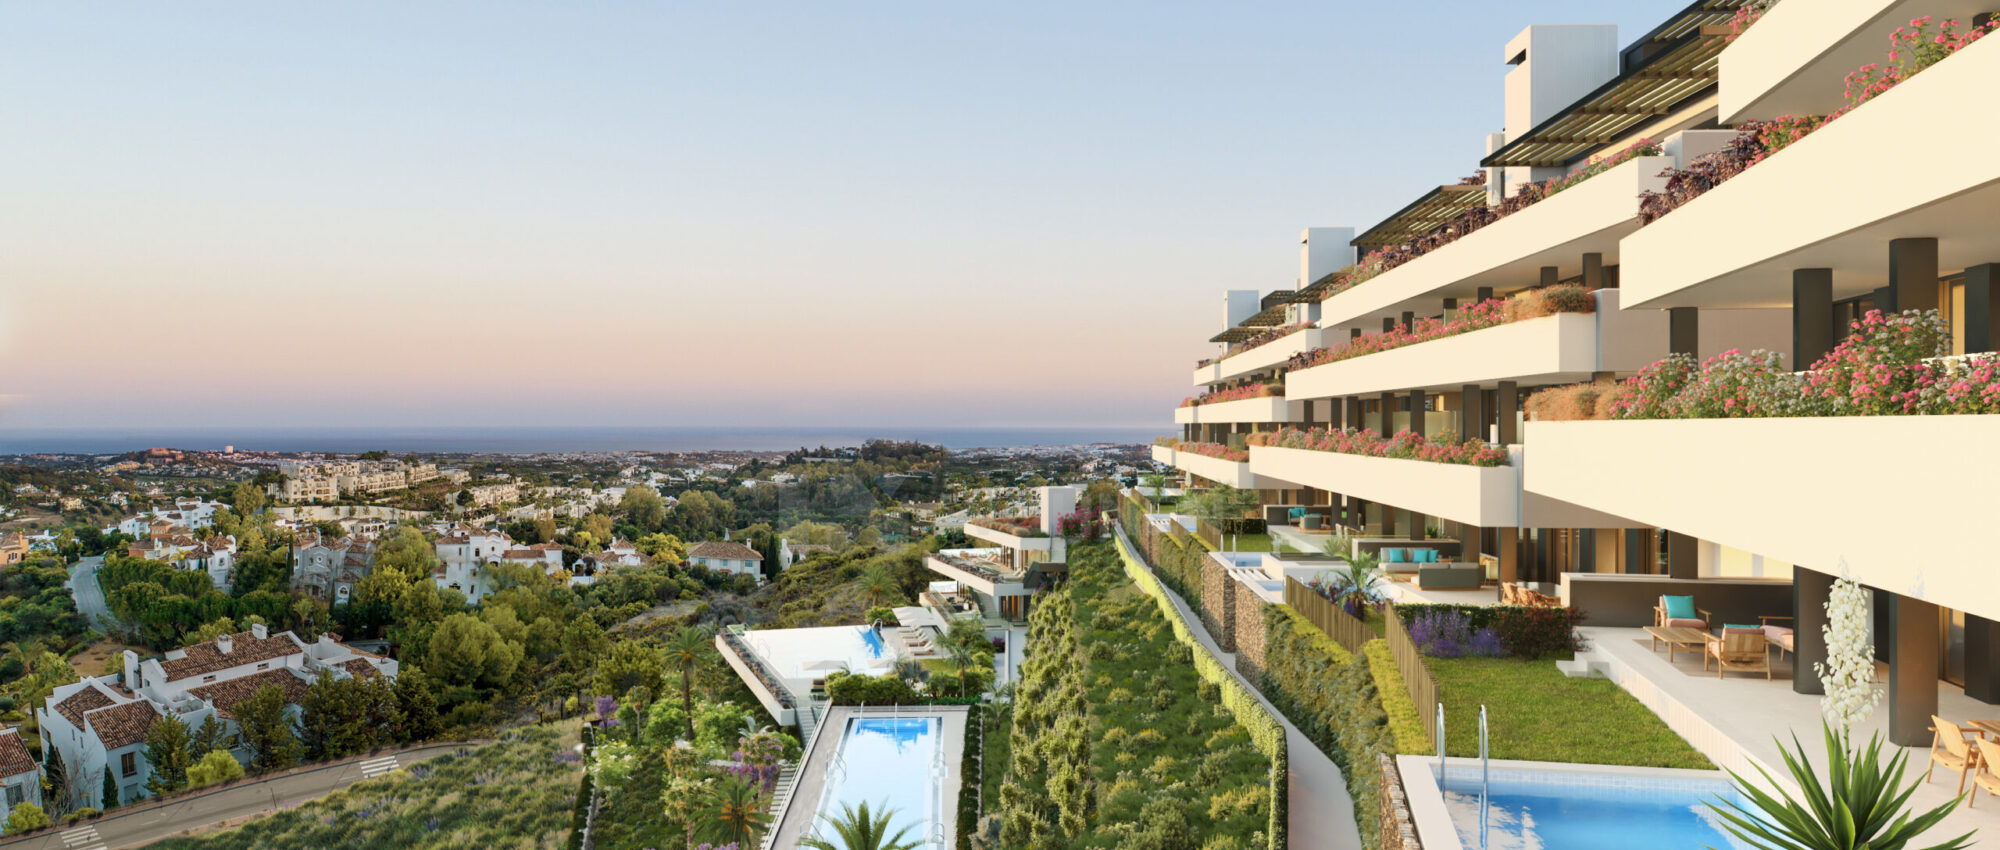 Brand new apartment project with panoramic sea views in Marbella